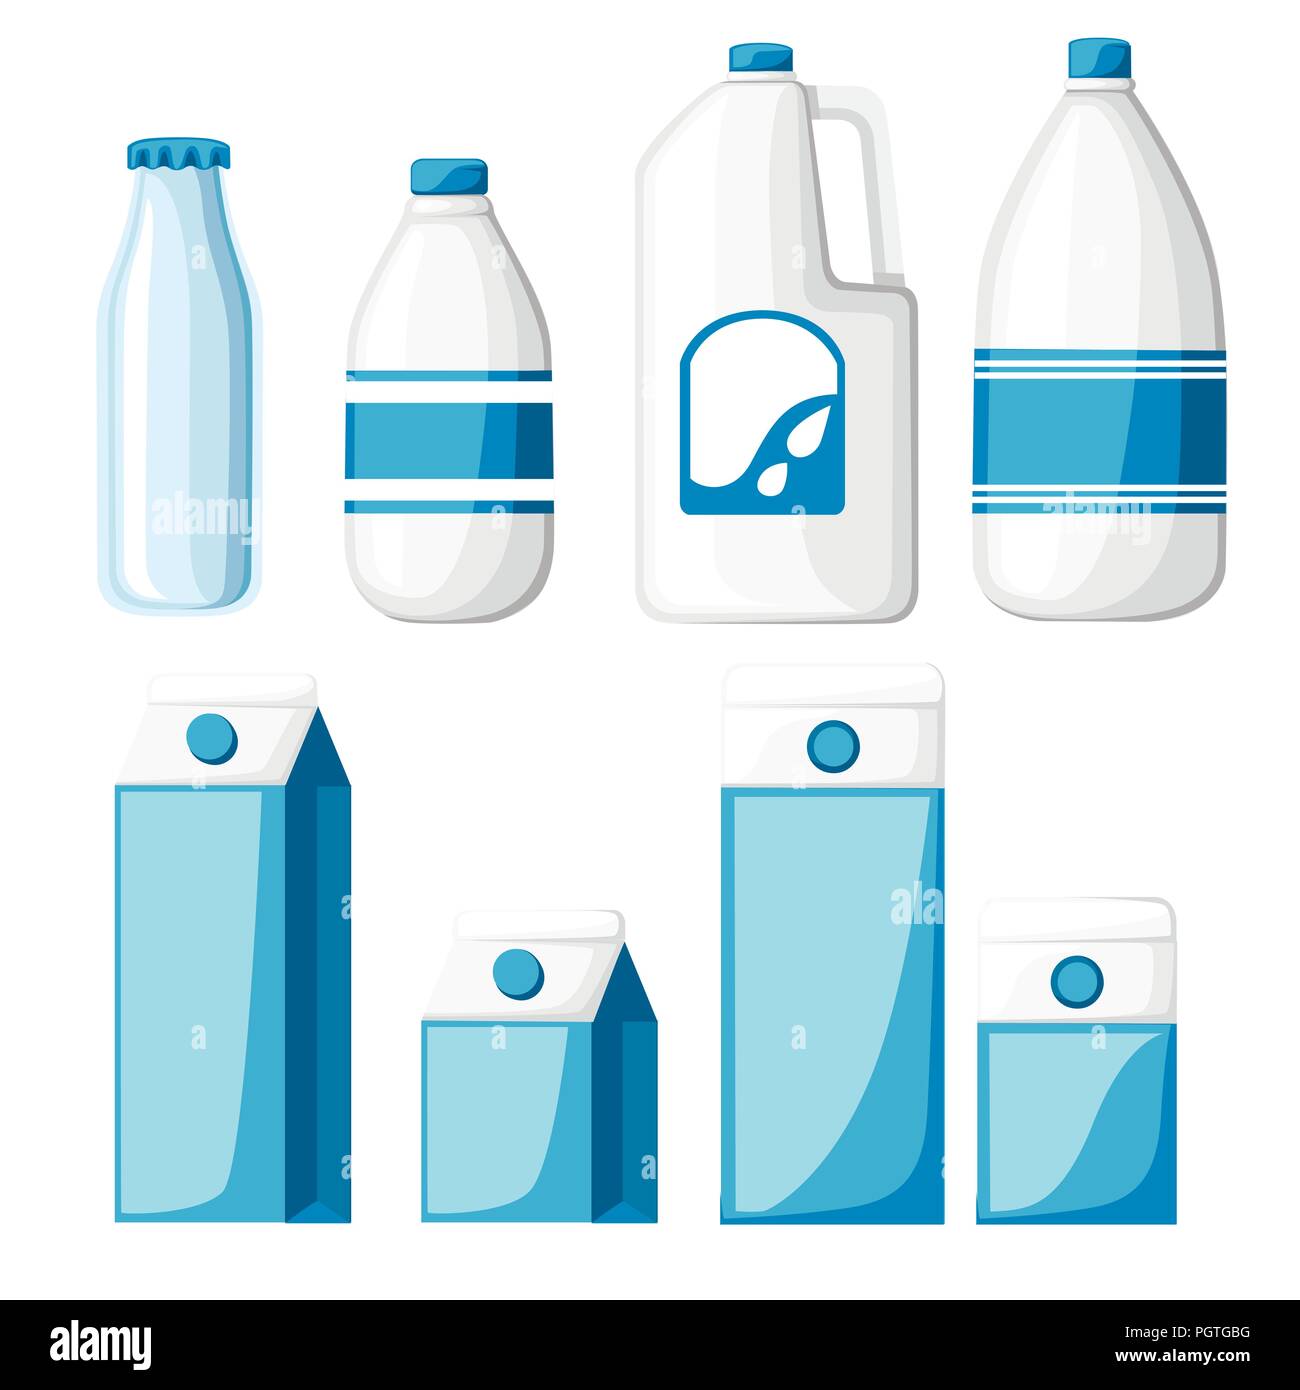 https://c8.alamy.com/comp/PGTGBG/milk-containers-collection-cardboard-box-plastic-and-glass-bottle-milk-template-flat-vector-illustration-isolated-on-white-background-PGTGBG.jpg